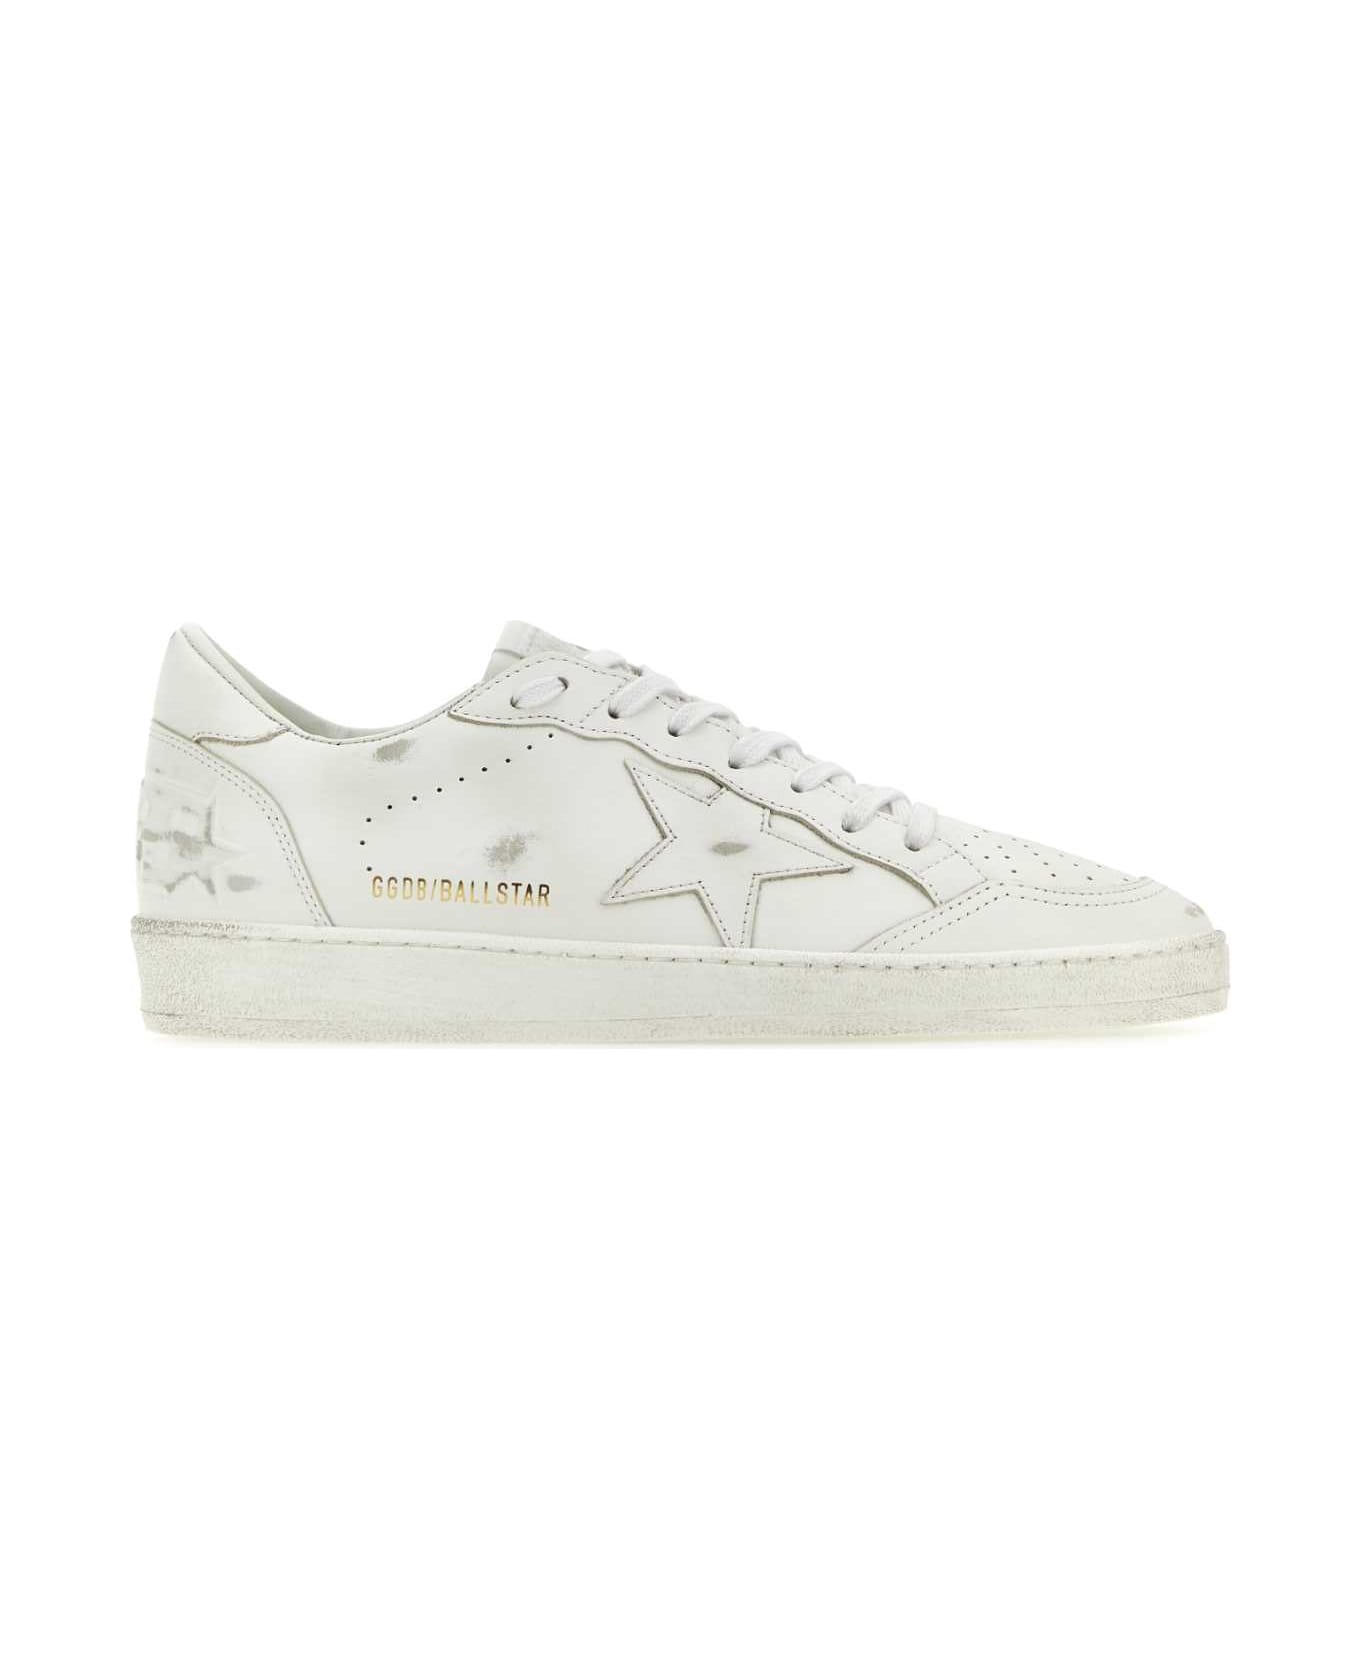 Golden Goose White Leather Ball Star Sneakers - OPTICWHITE